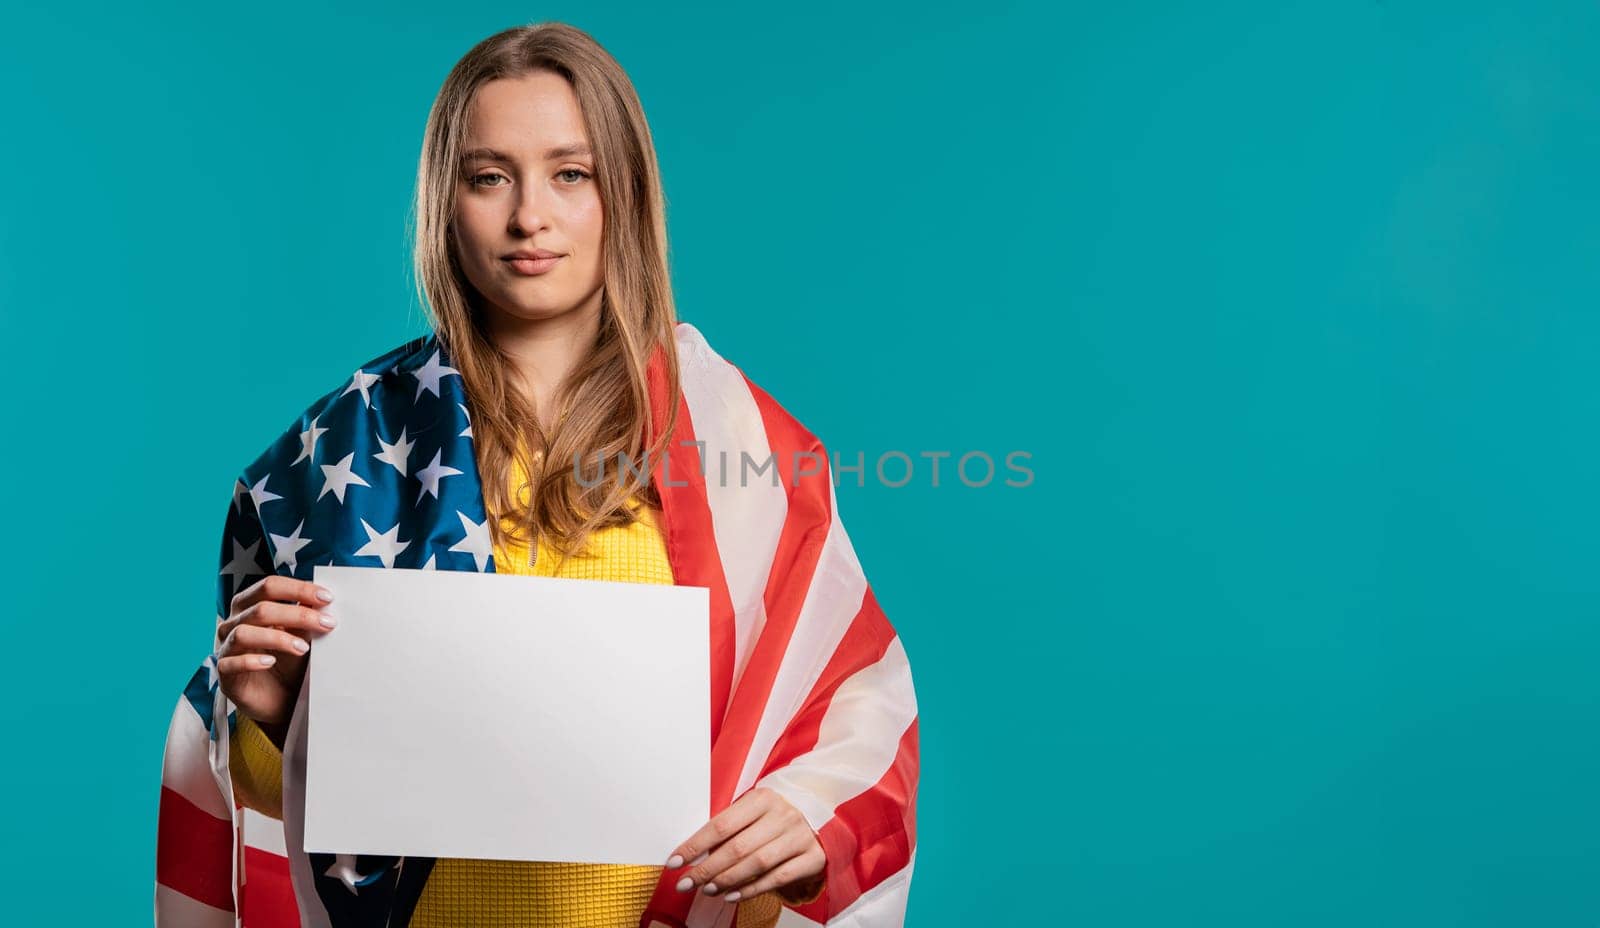 American woman with white a4 paper poster. Copy space. Smiling lady, blue studio. High quality photo